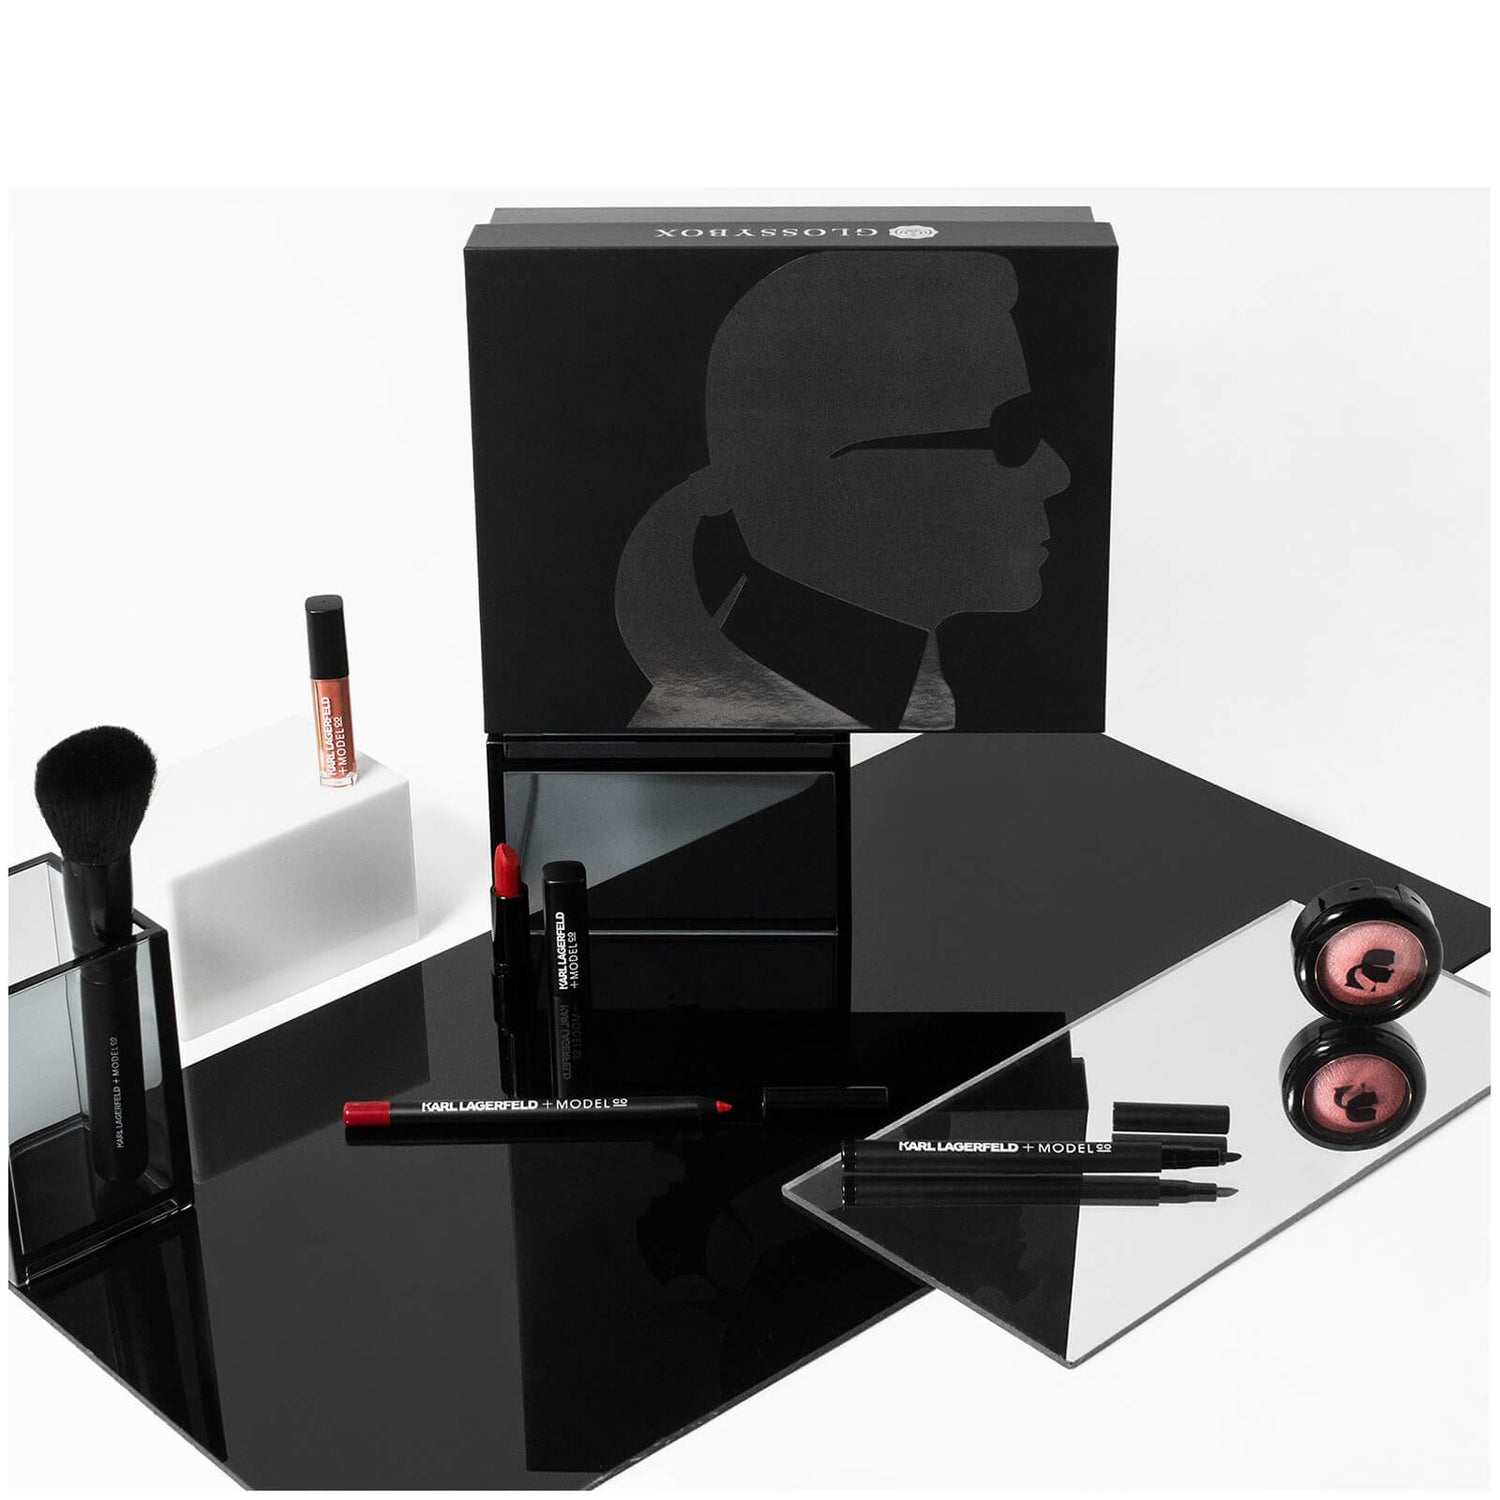 Karl Lagerfeld + ModelCo Limited Edition - US